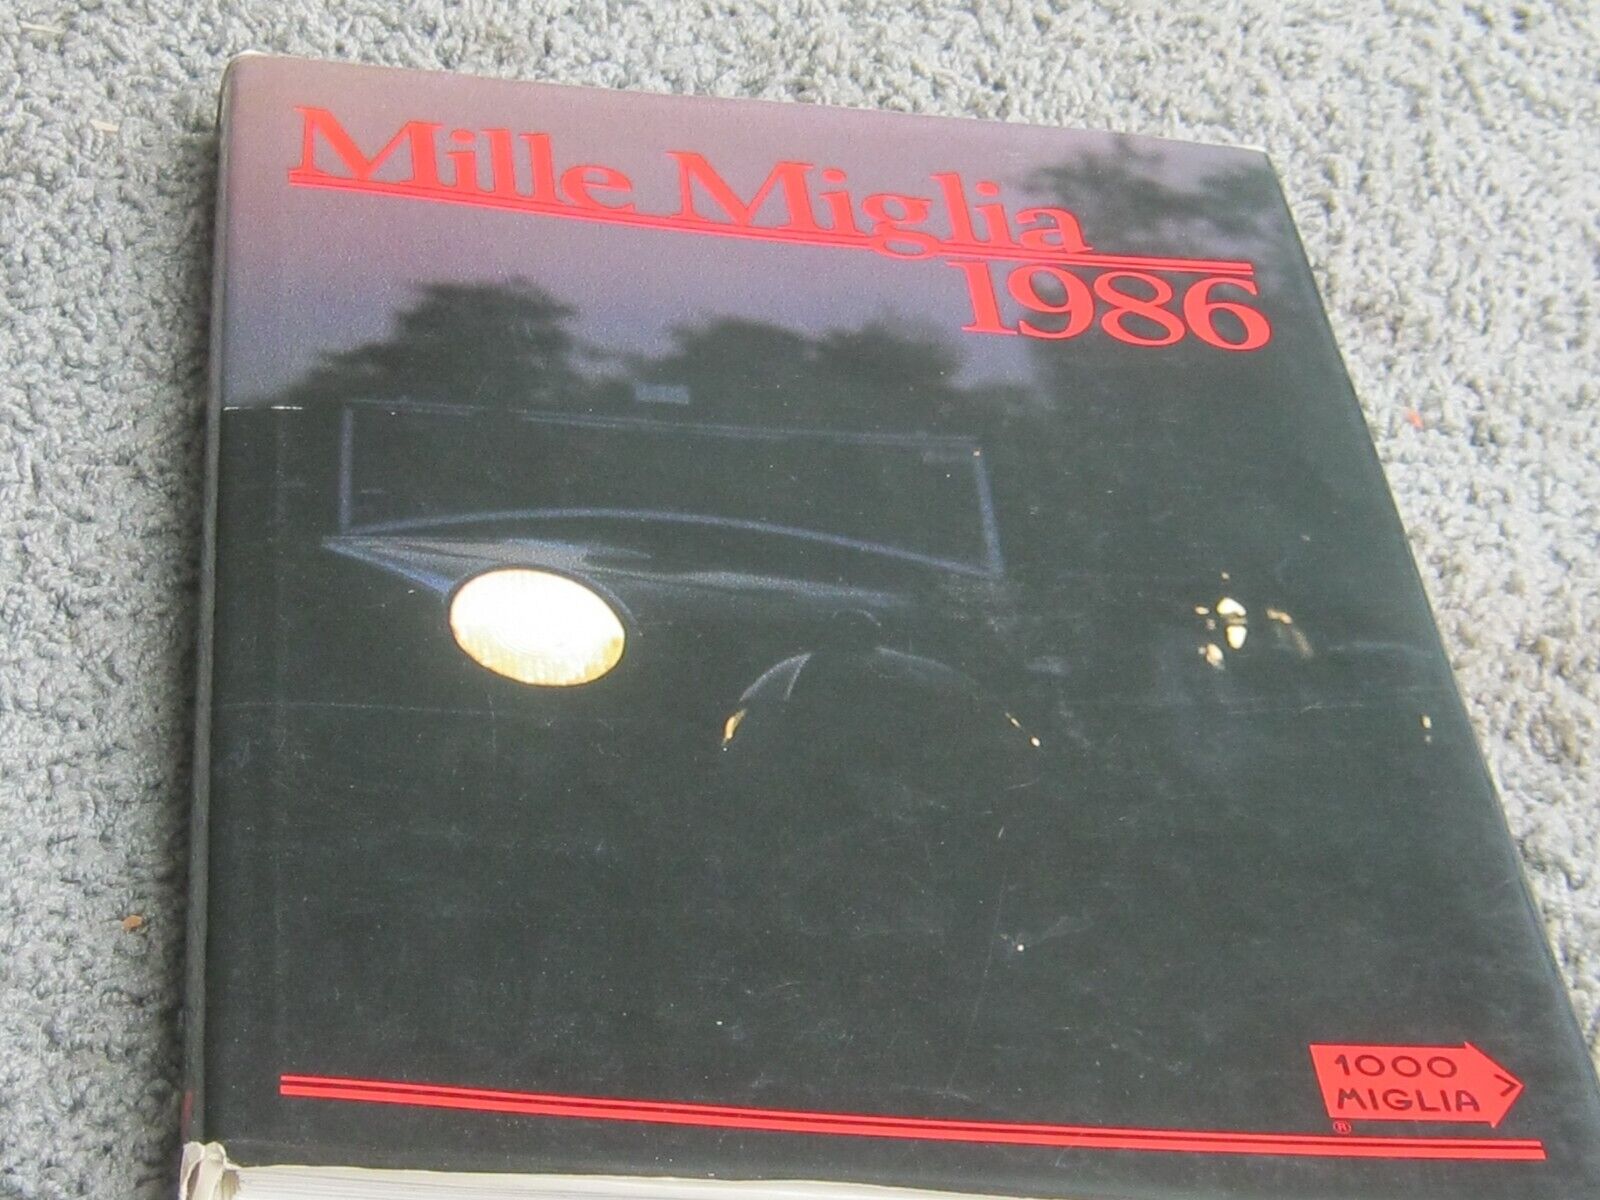 MILLE MIGLIA 1986. Car book published in Italian and English languages